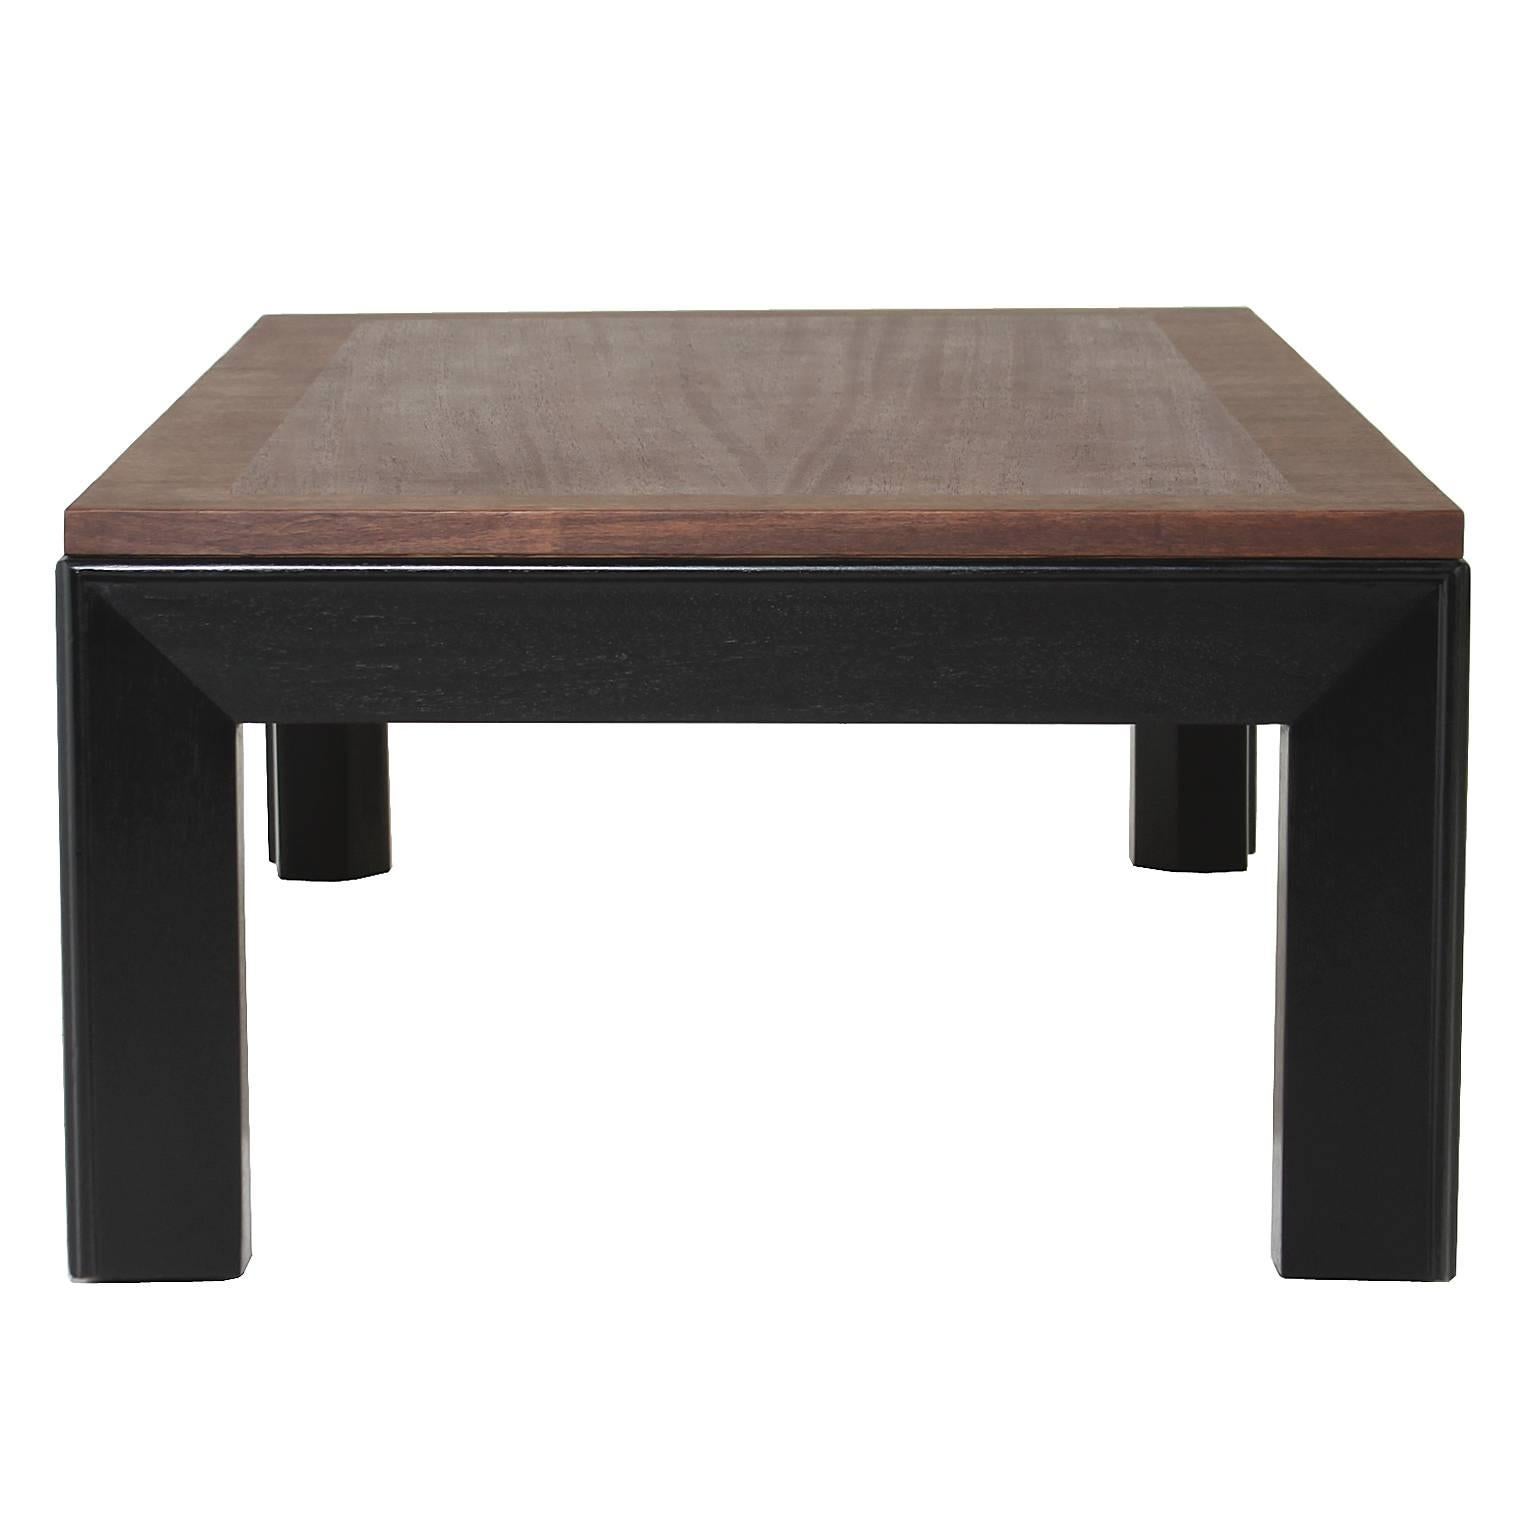 Mid-20th Century Widdicomb Mahogany and Black Lacquer Long Coffee Table  For Sale